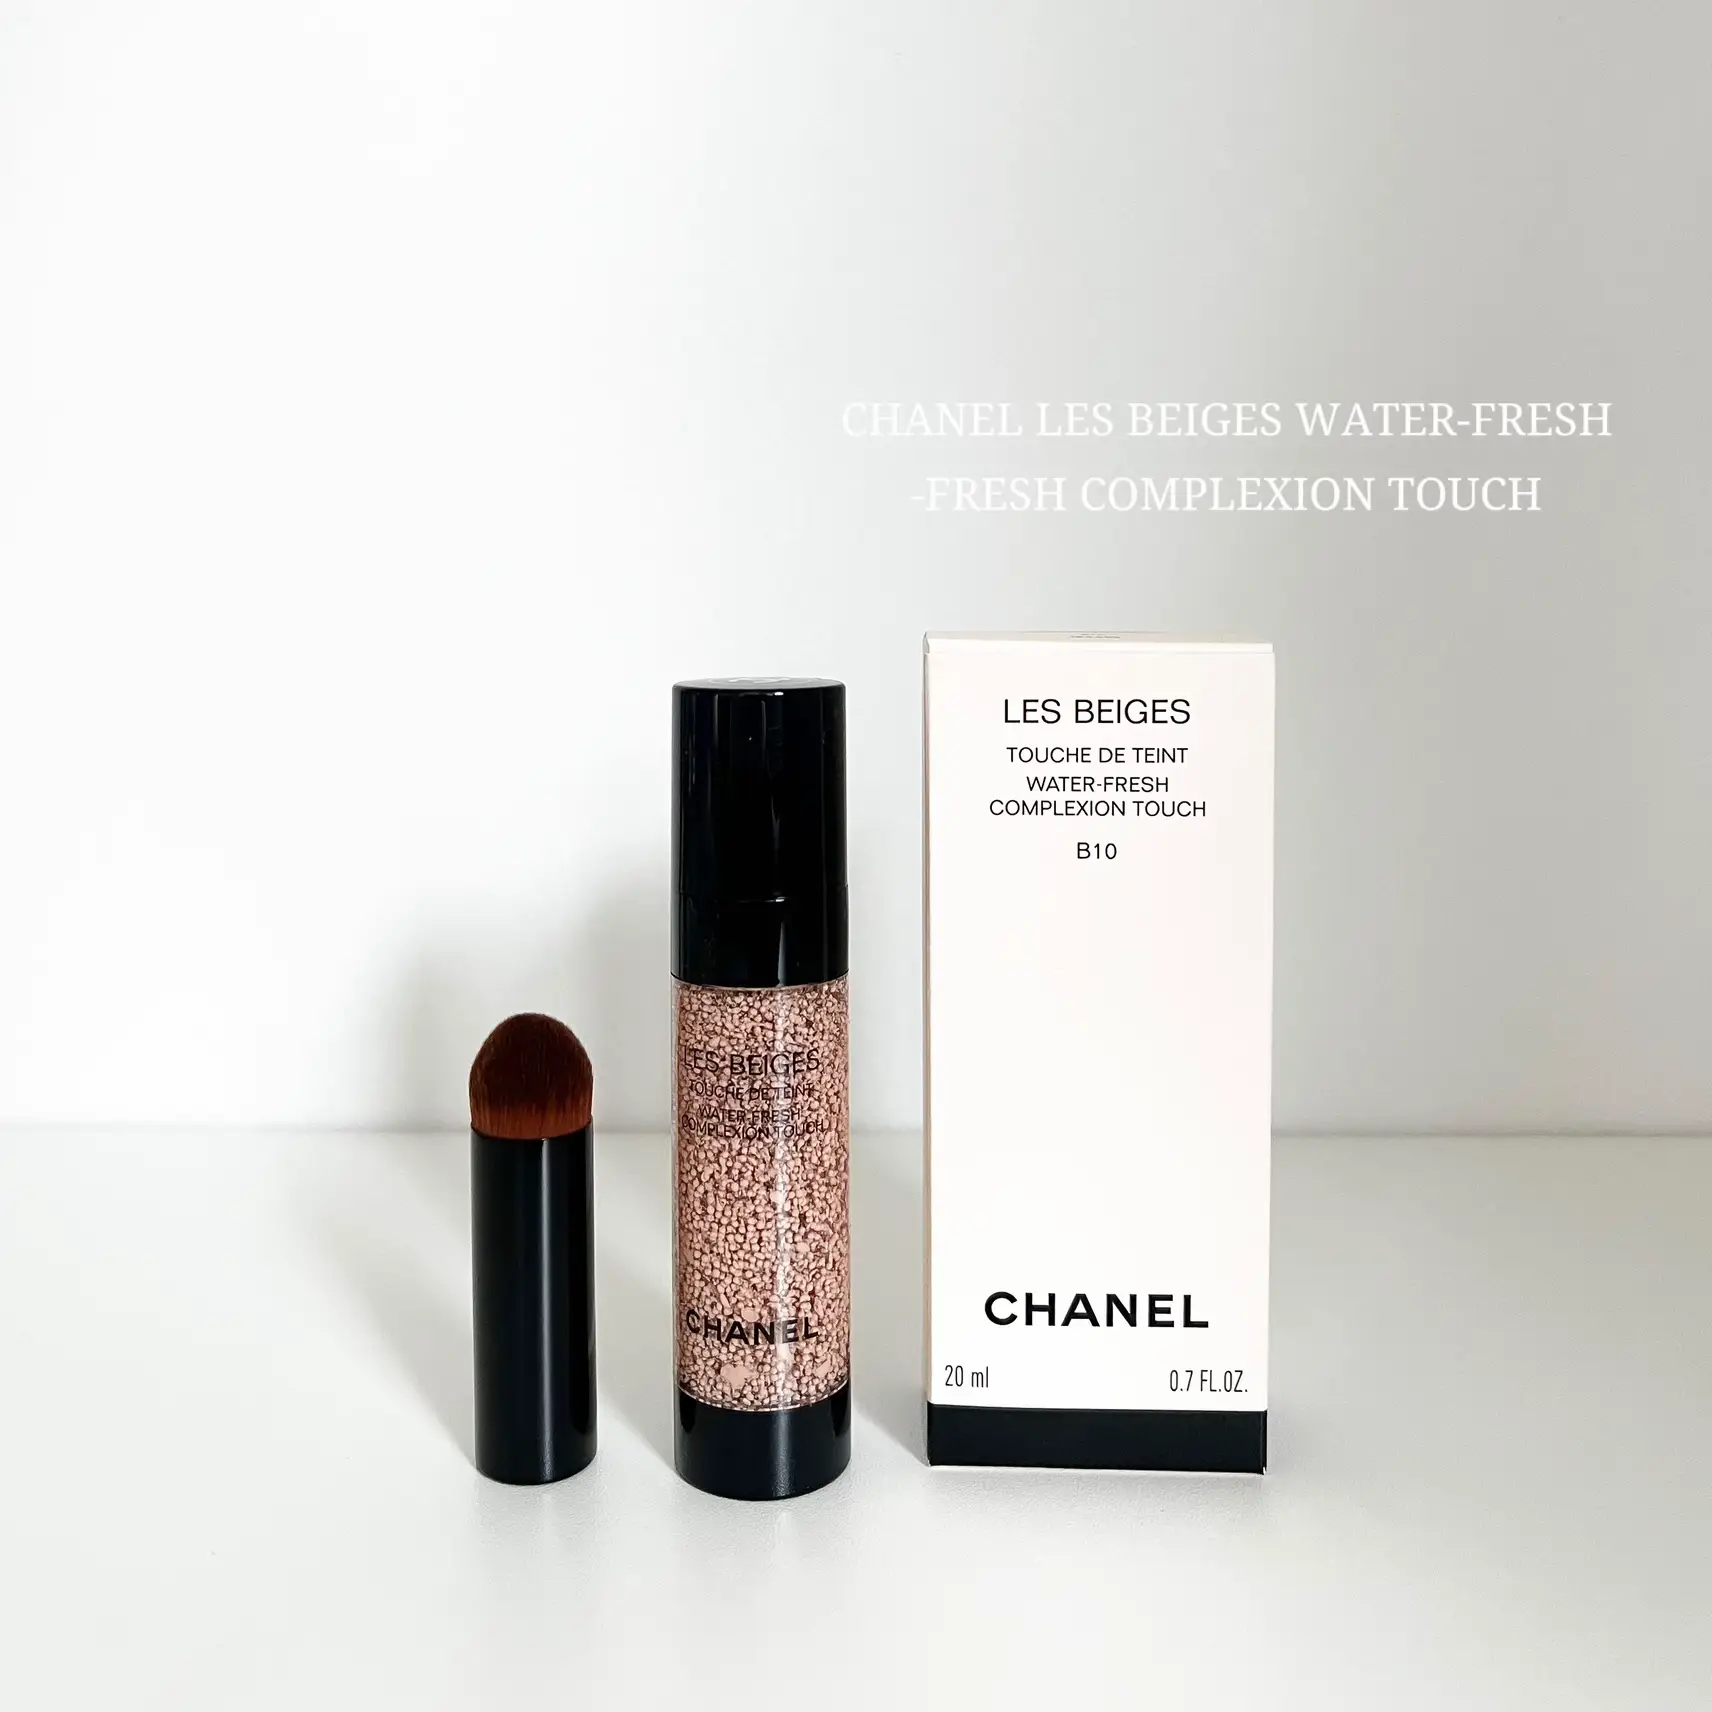 CHANEL LES BEIGES WATER-FRESH COMPLEXION TOUCH, Gallery posted by peeraya